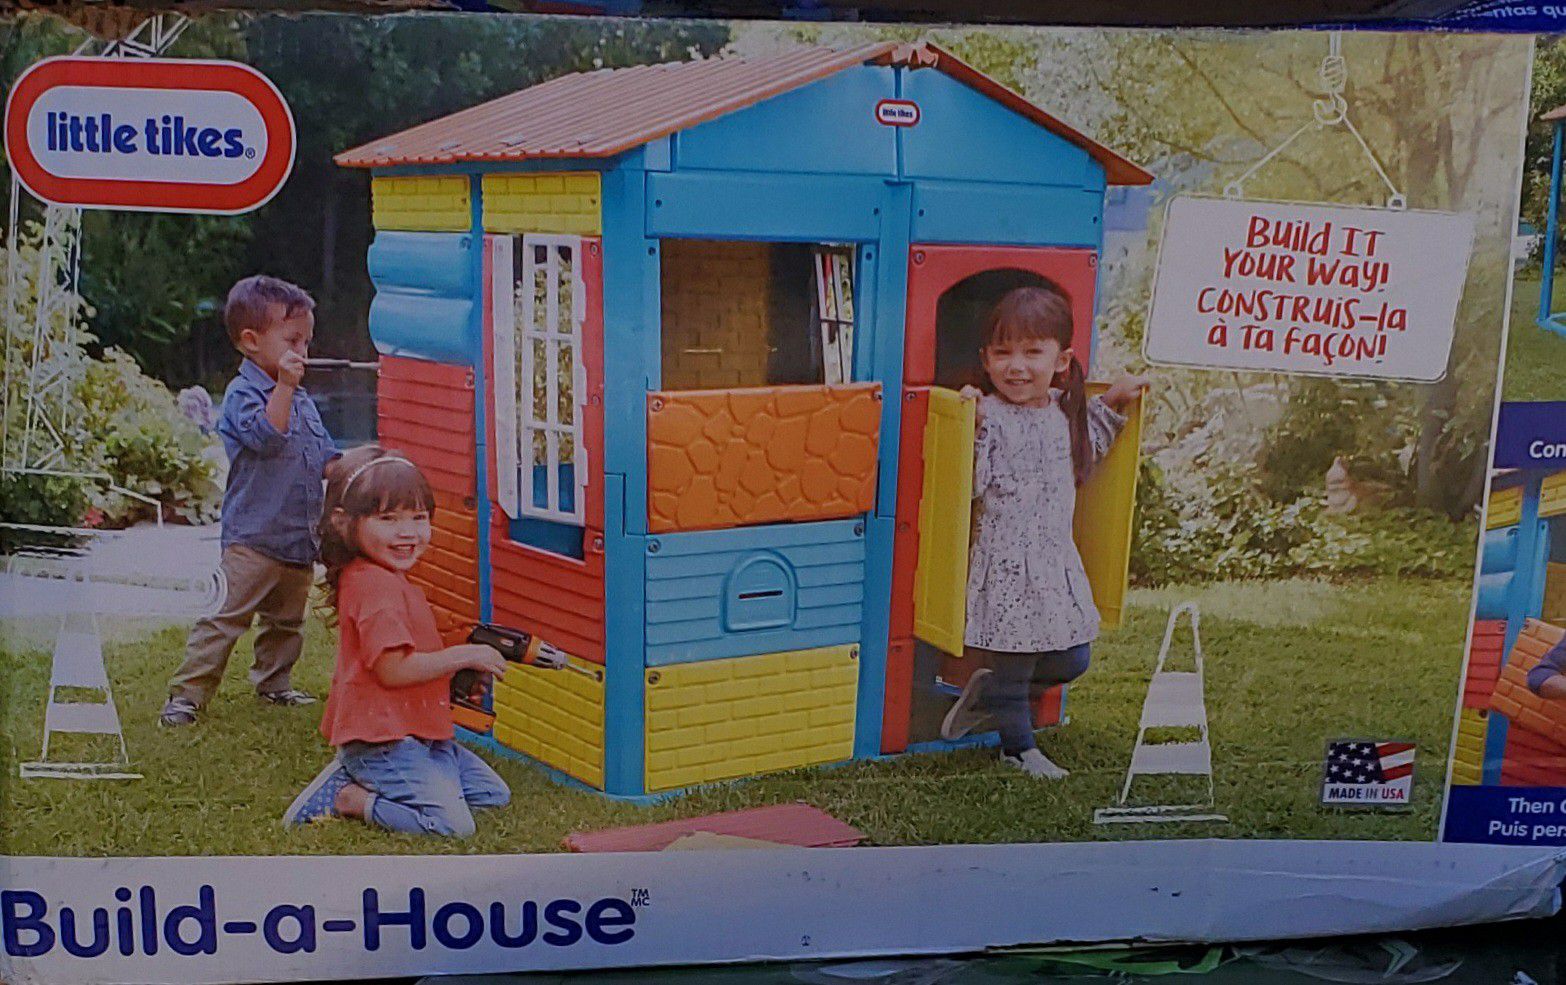 Little tykes Build a House